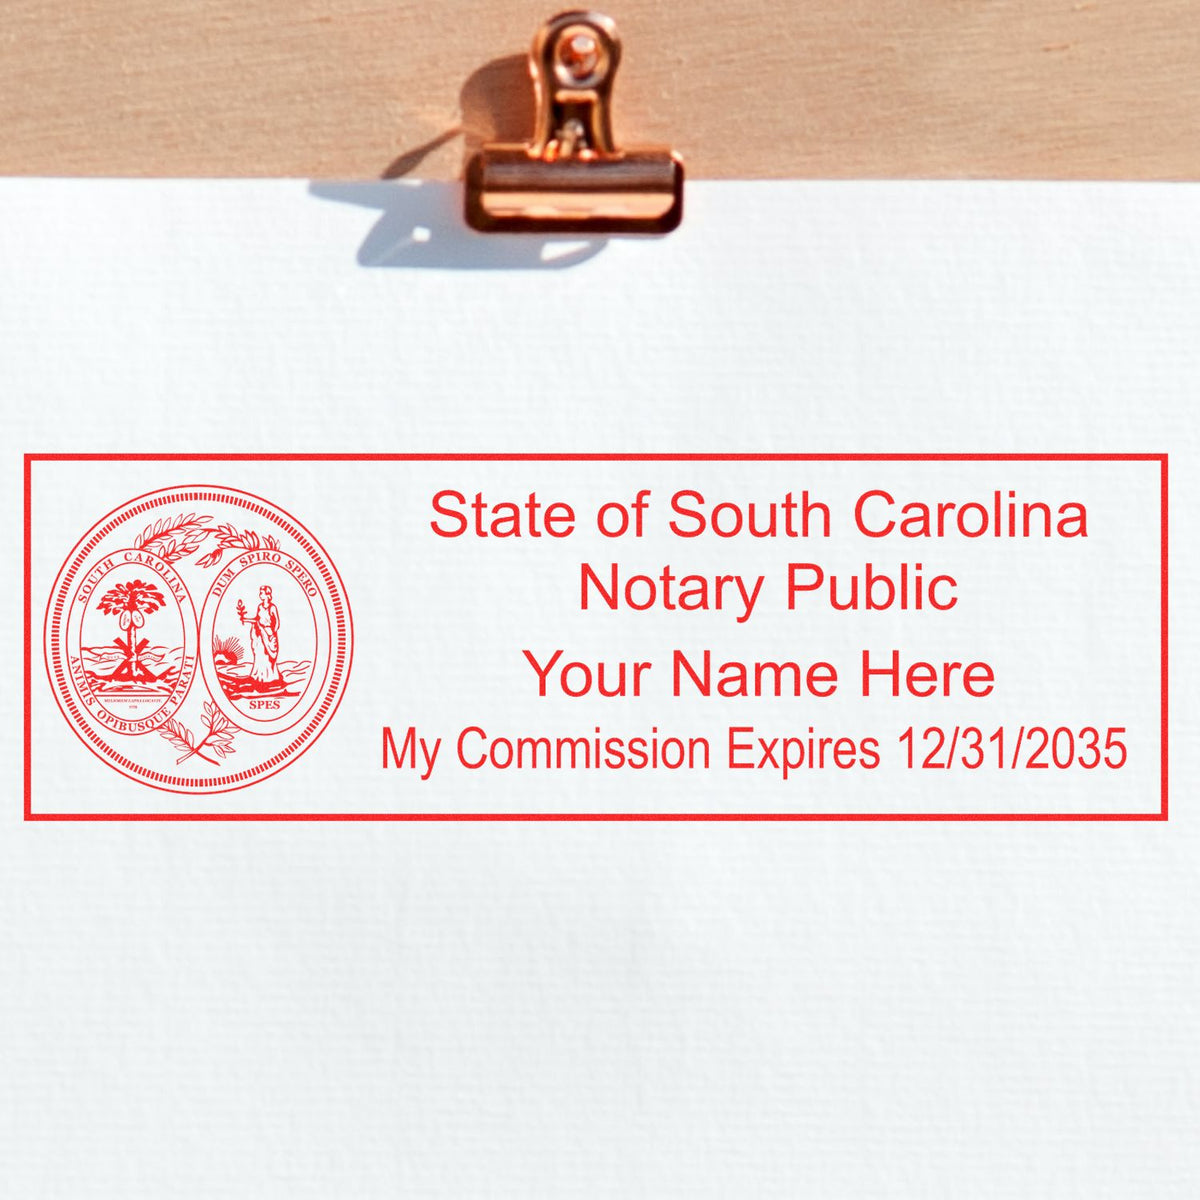 The Heavy-Duty South Carolina Rectangular Notary Stamp stamp impression comes to life with a crisp, detailed photo on paper - showcasing true professional quality.